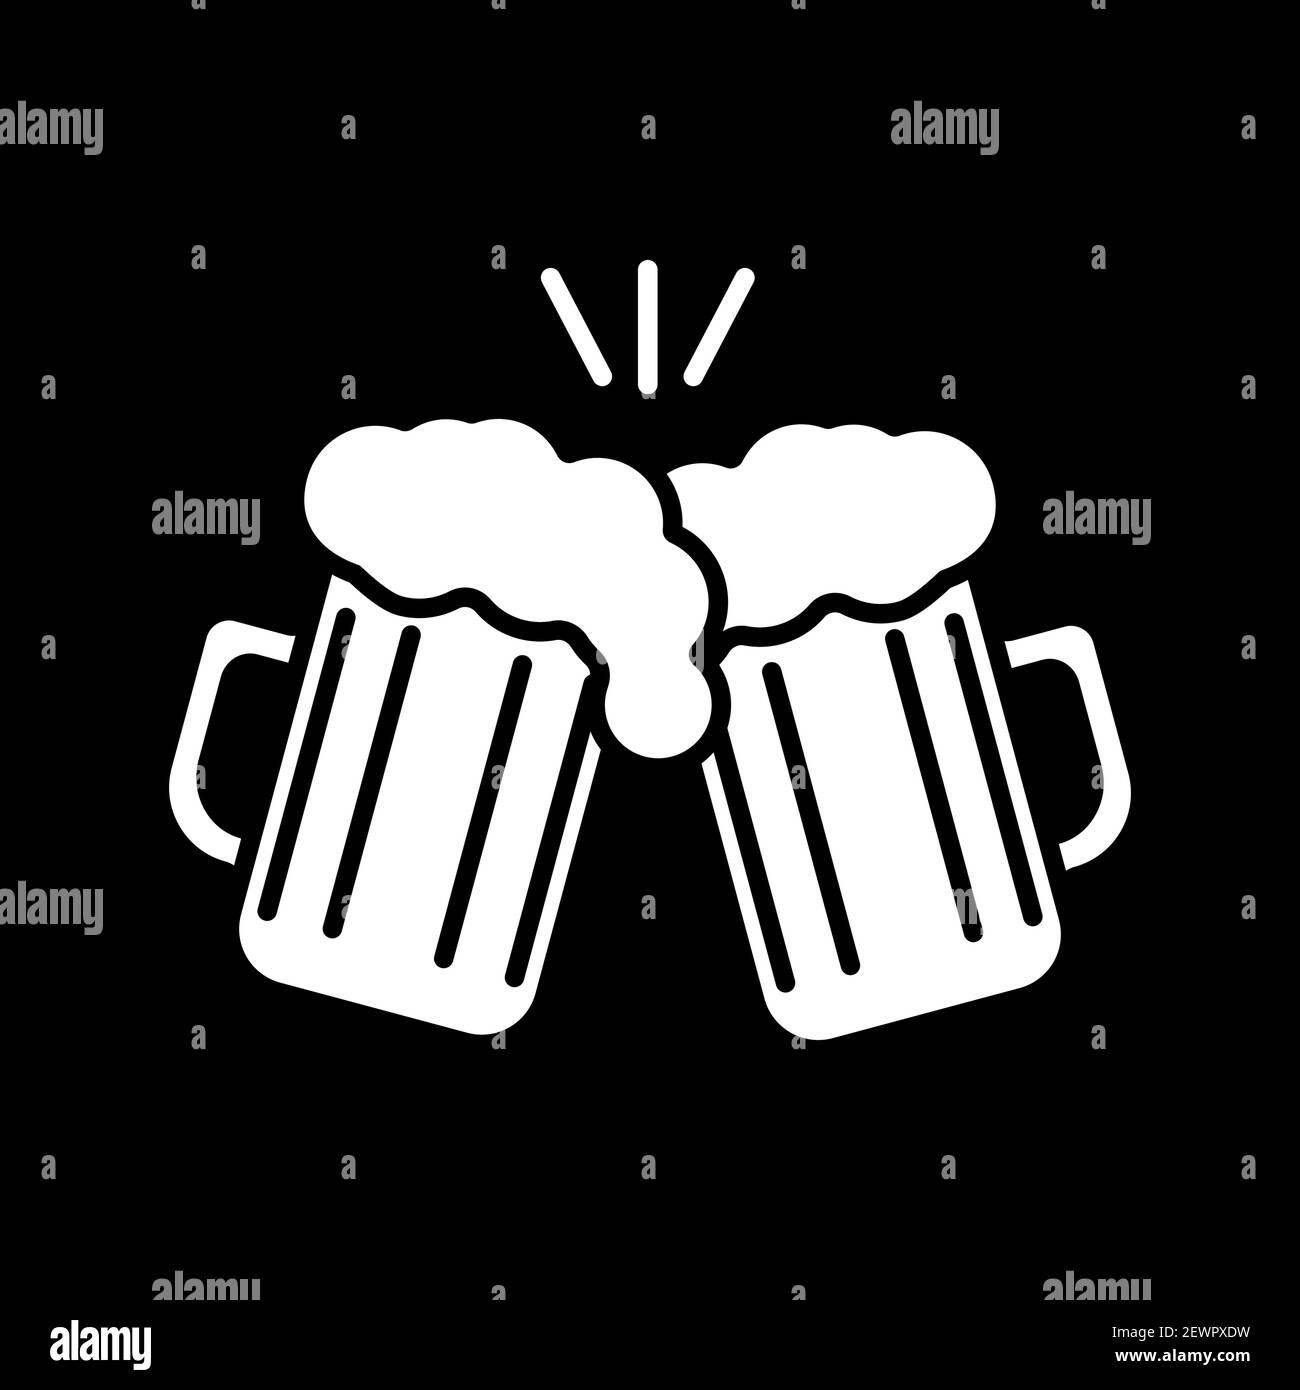 Toast with beer mugs dark mode glyph icon Stock Vector